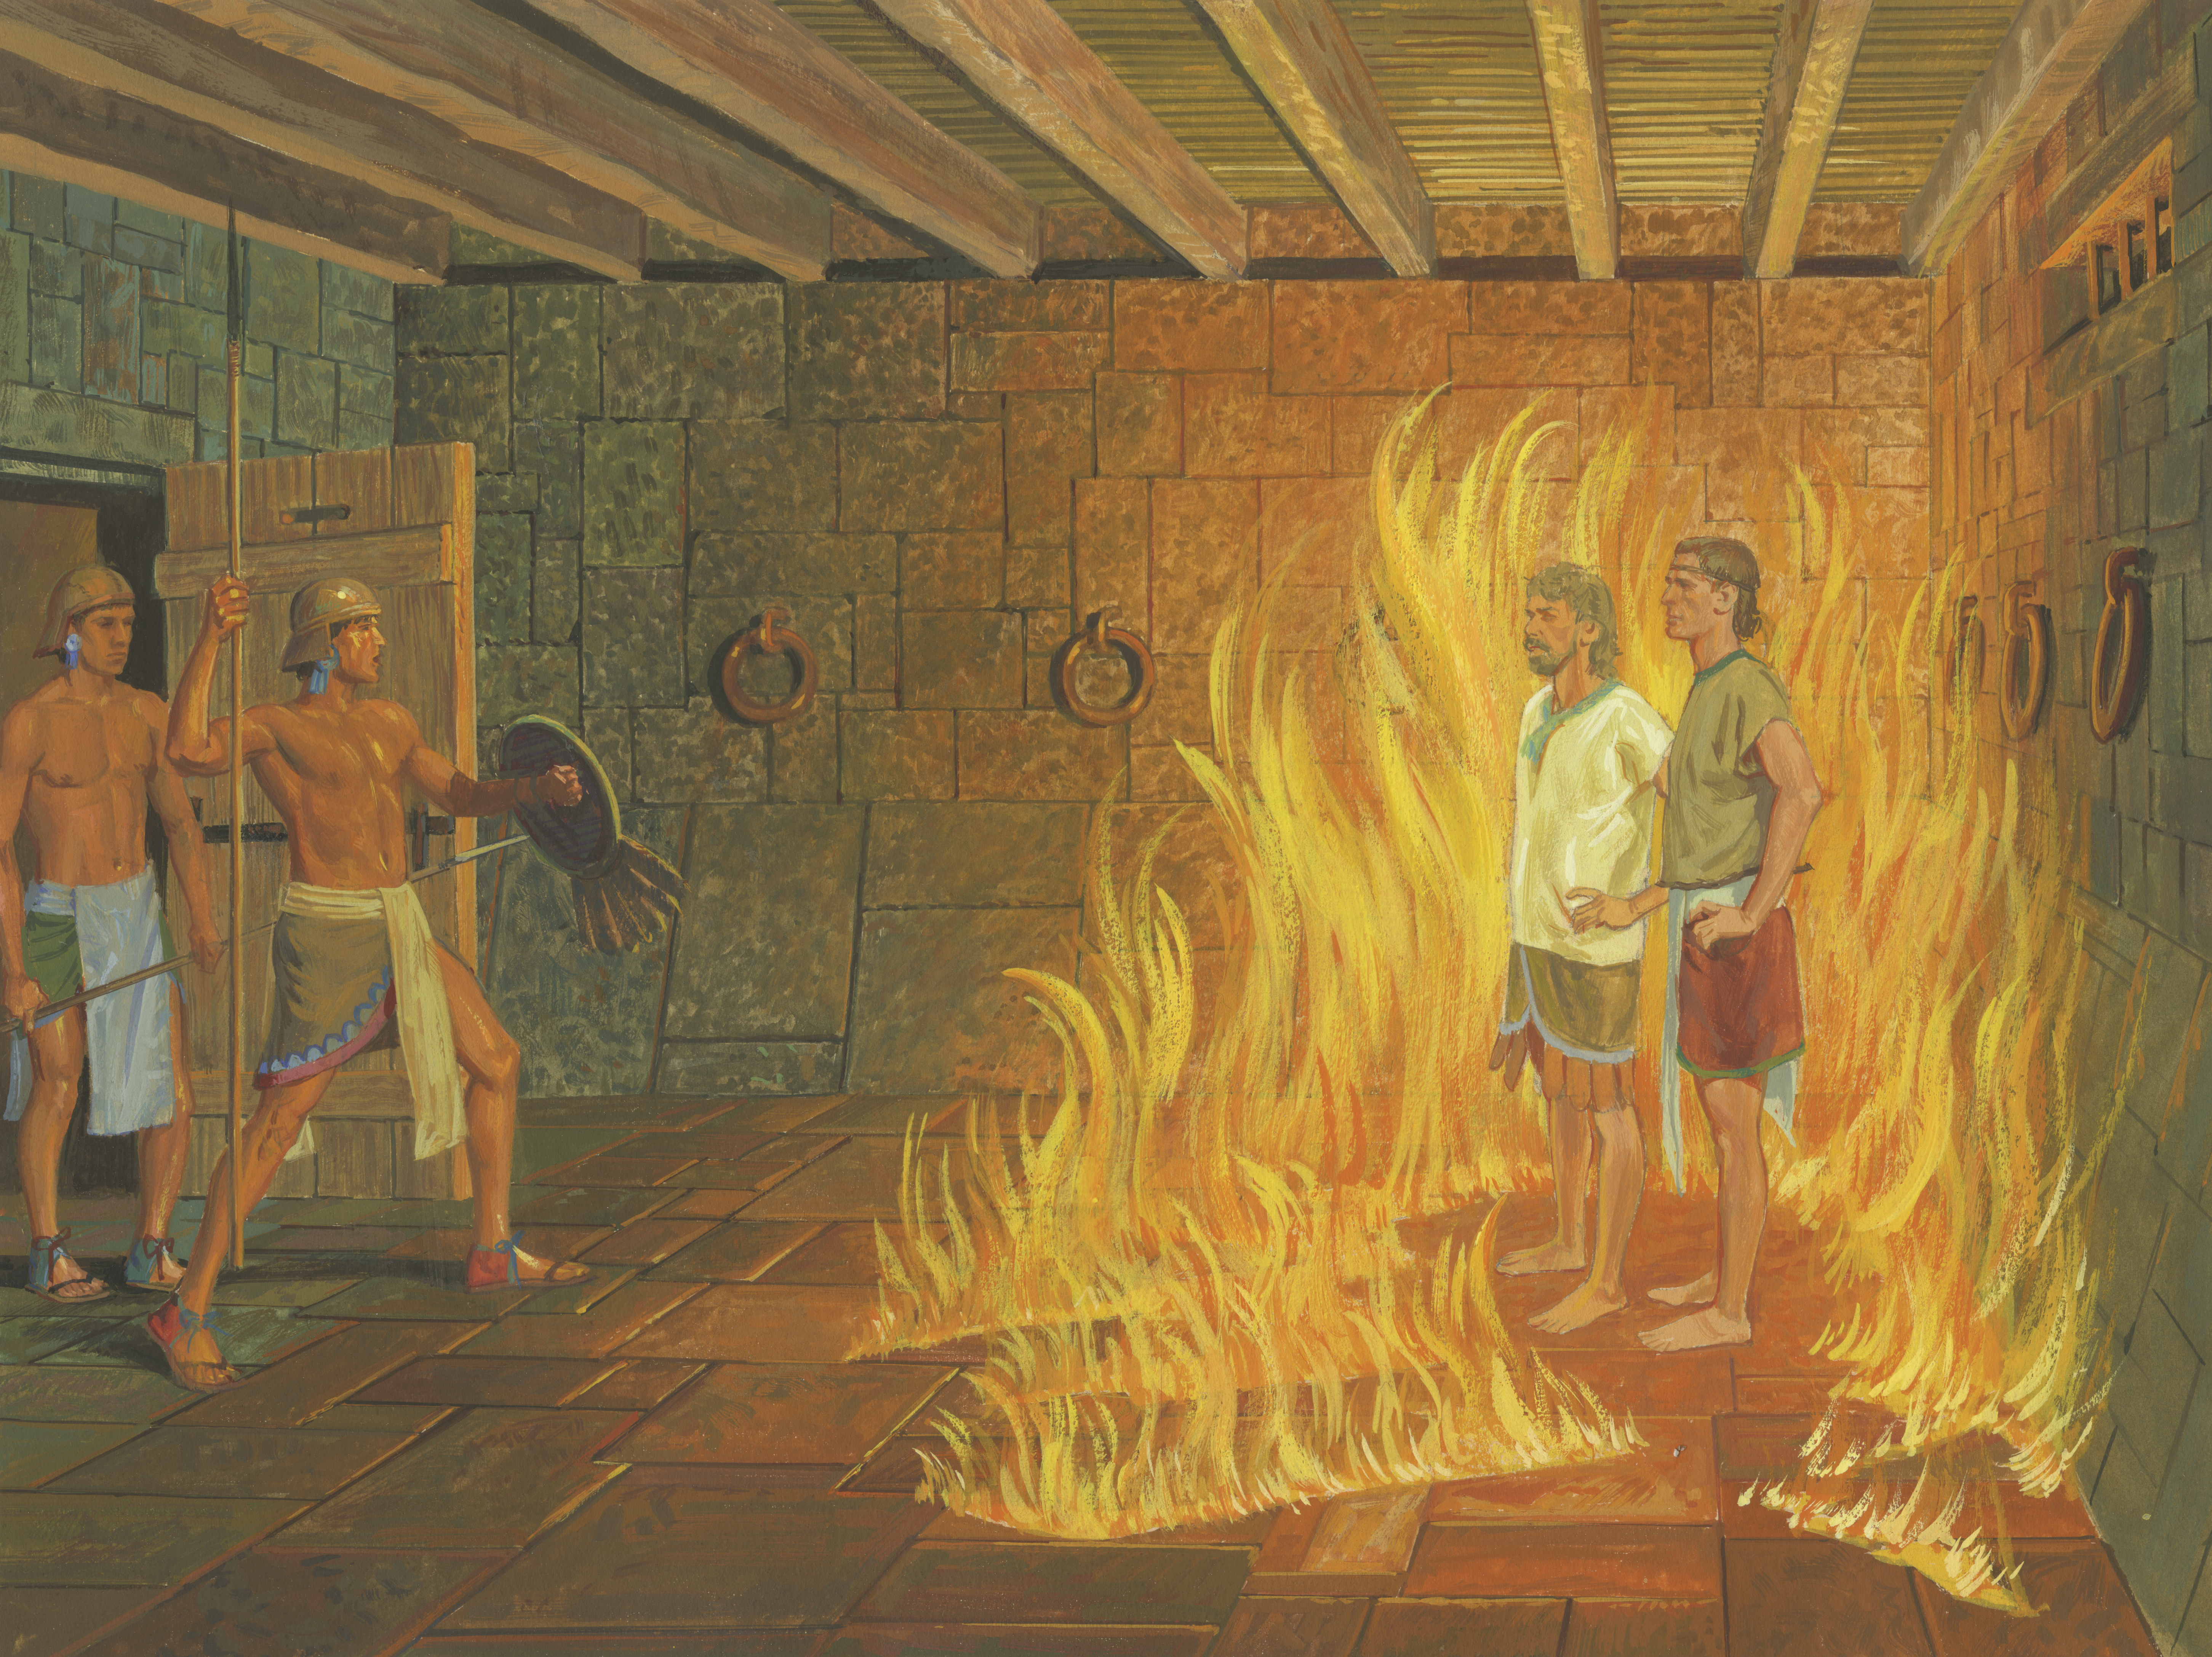 A painting by Jerry Thompson depicting Nephi and Lehi in prison; Primary manual 4-41